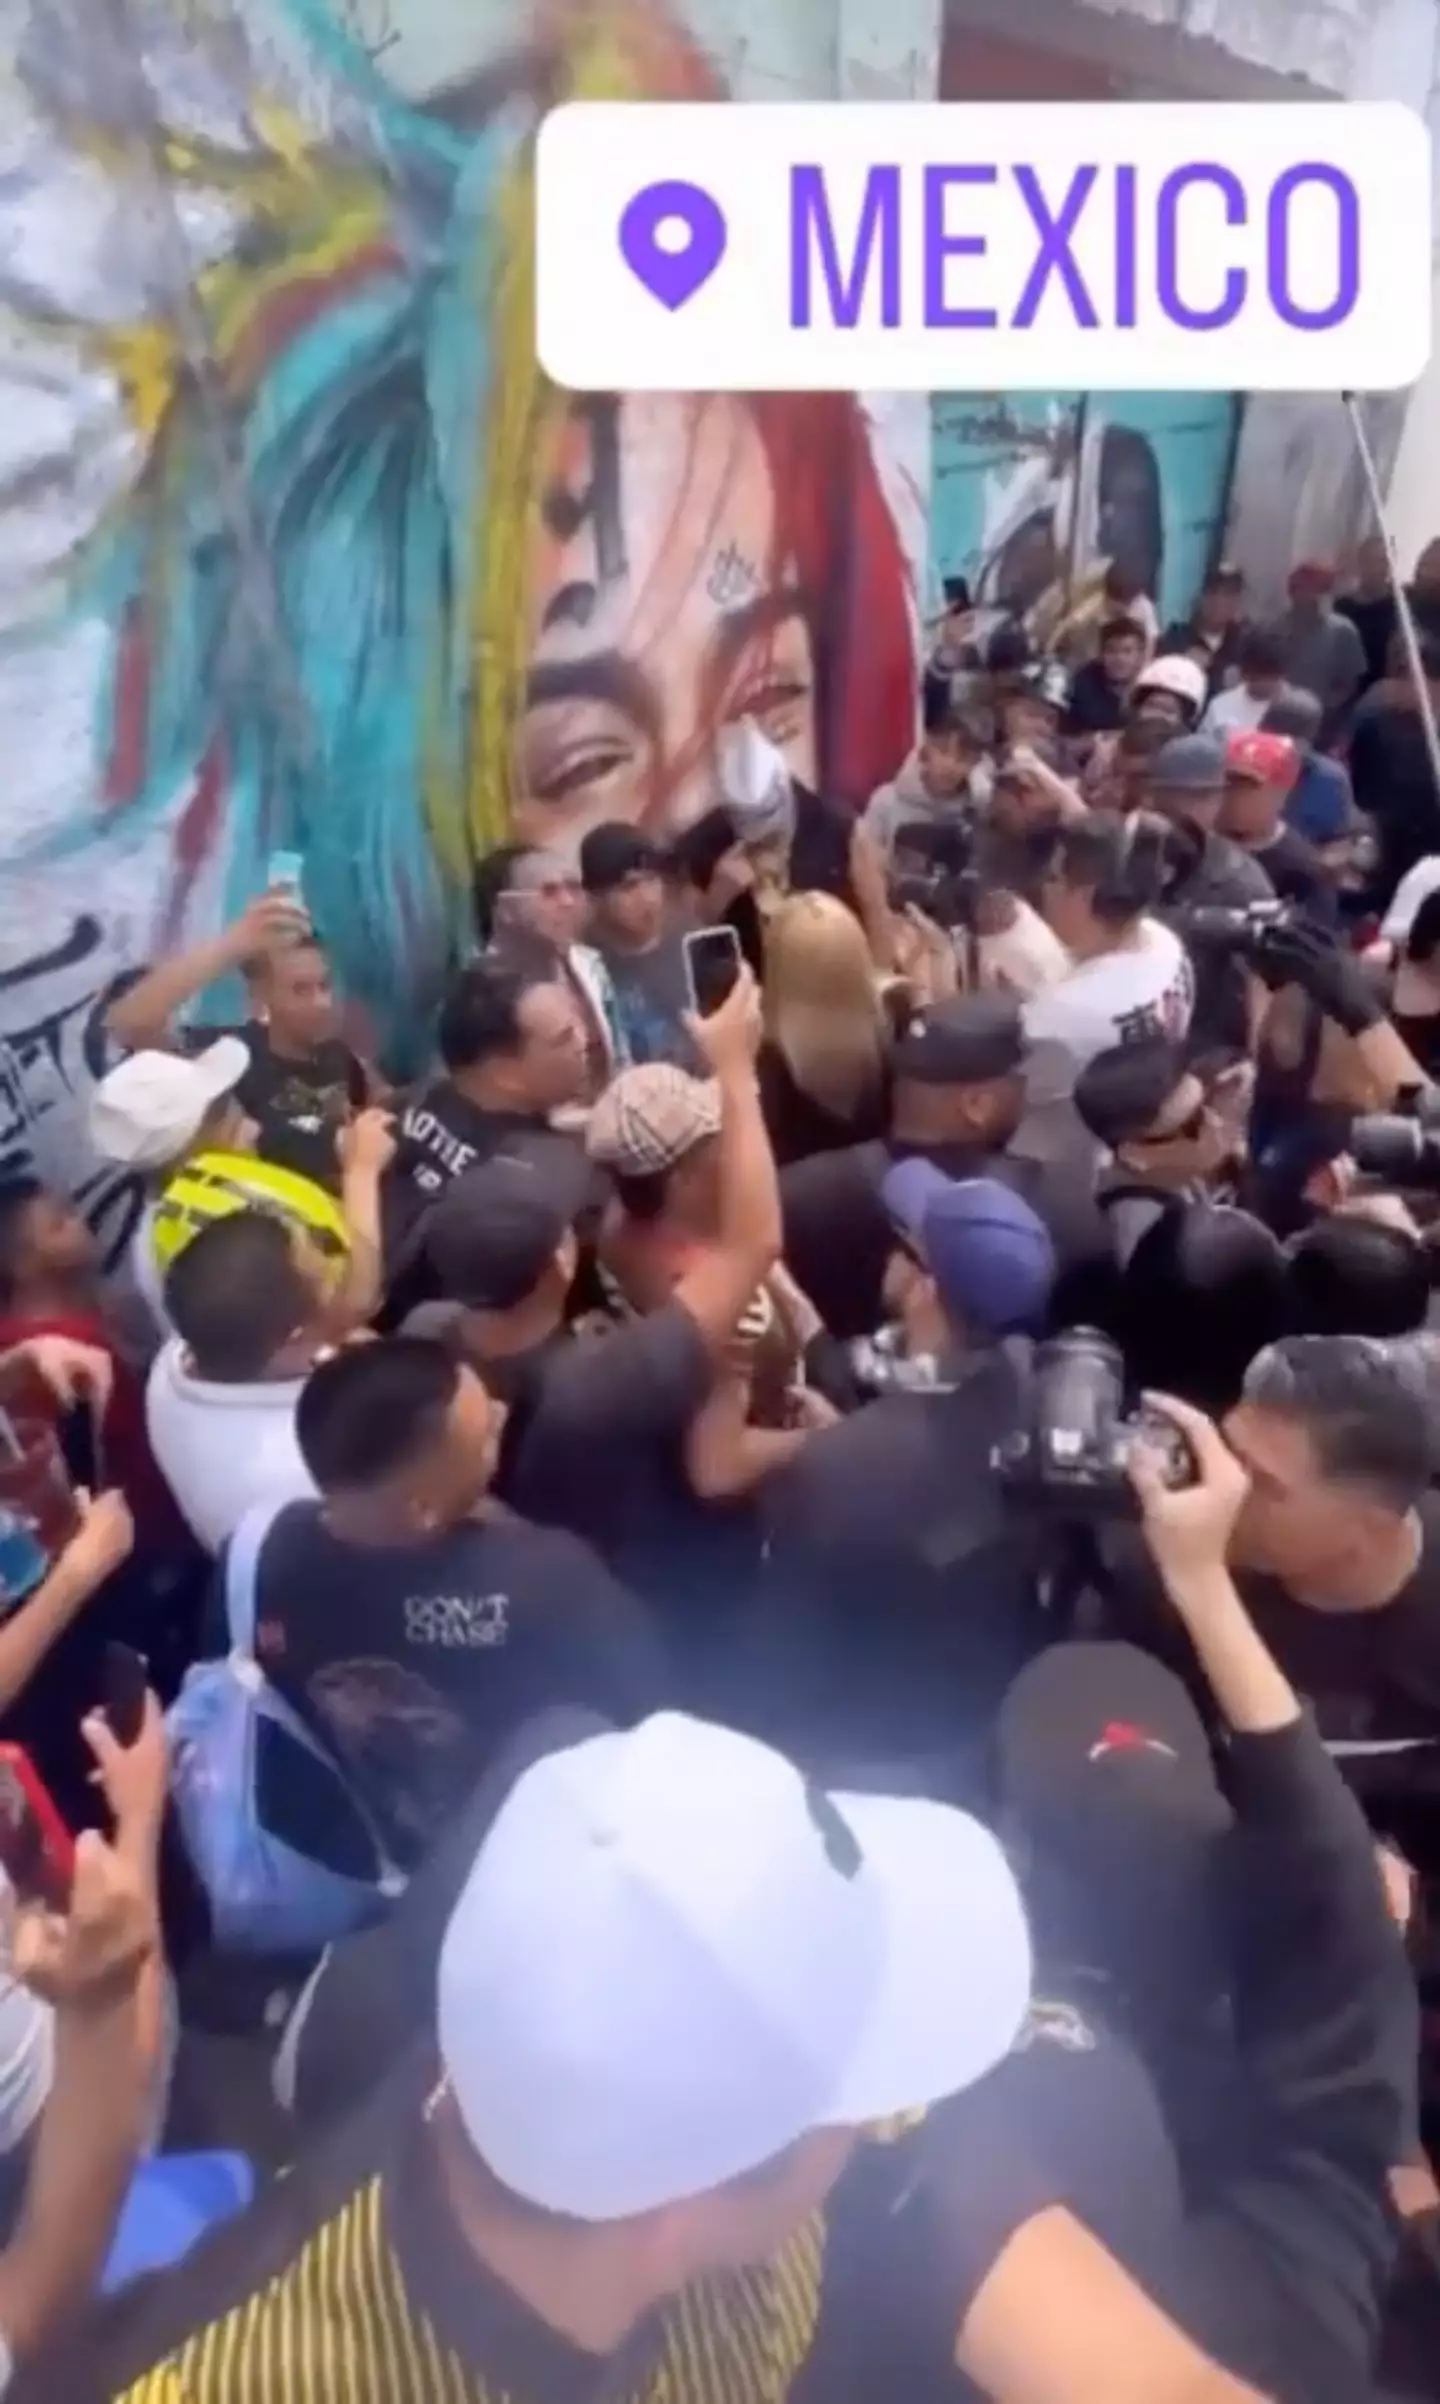 Tekashi 6ix9ine was filmed meeting and greeting fans in Tepito, Mexico.